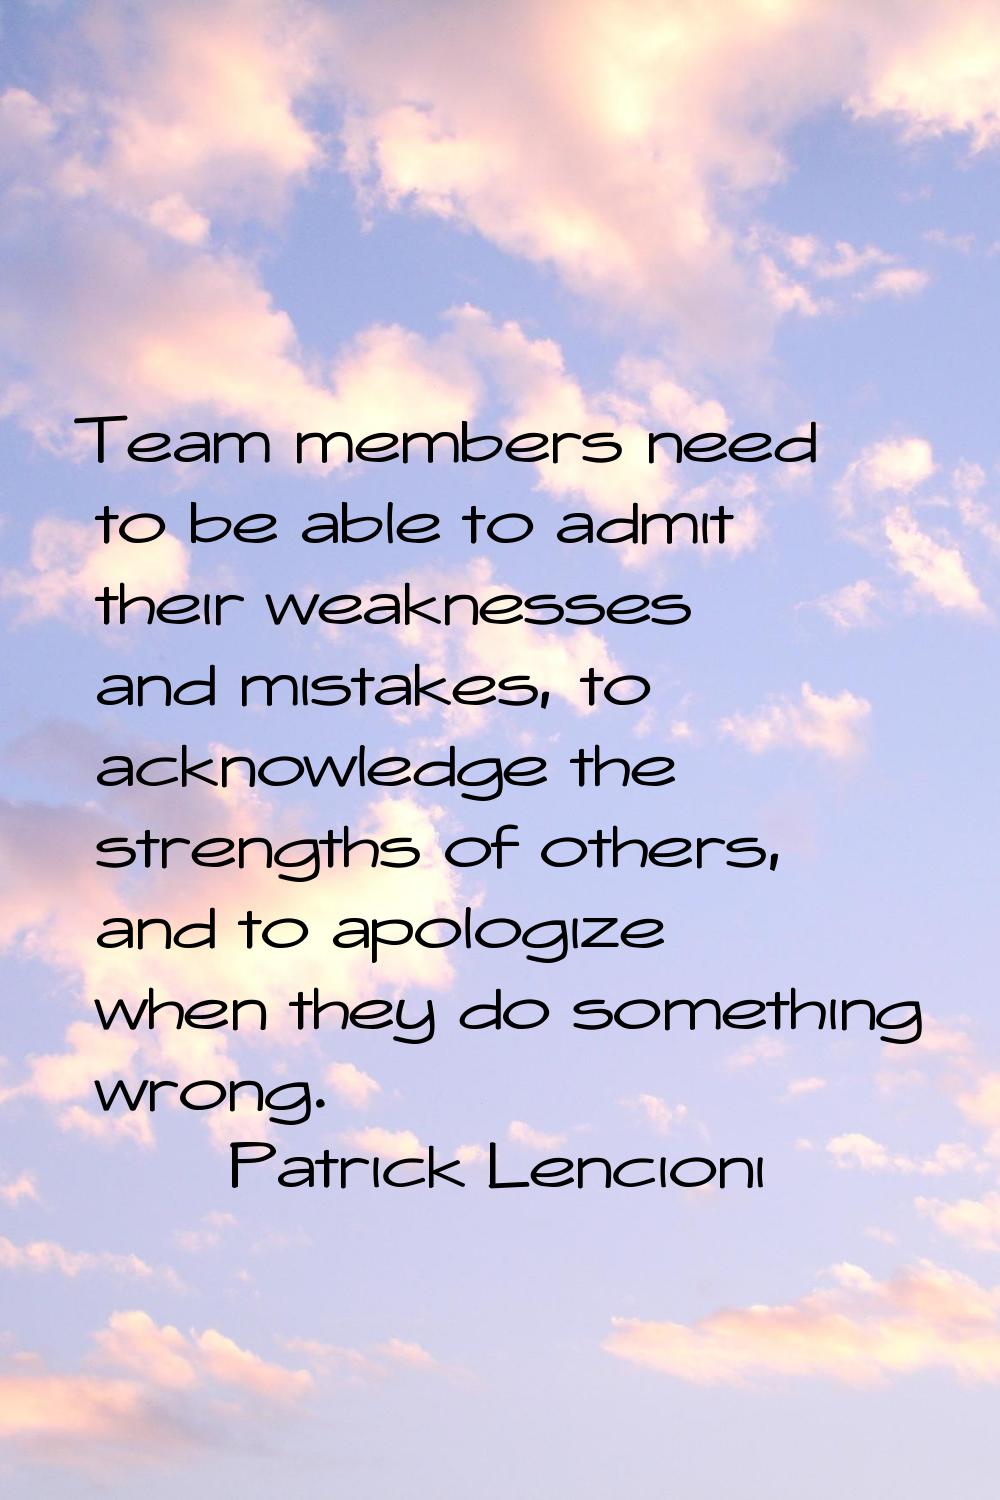 Team members need to be able to admit their weaknesses and mistakes, to acknowledge the strengths o